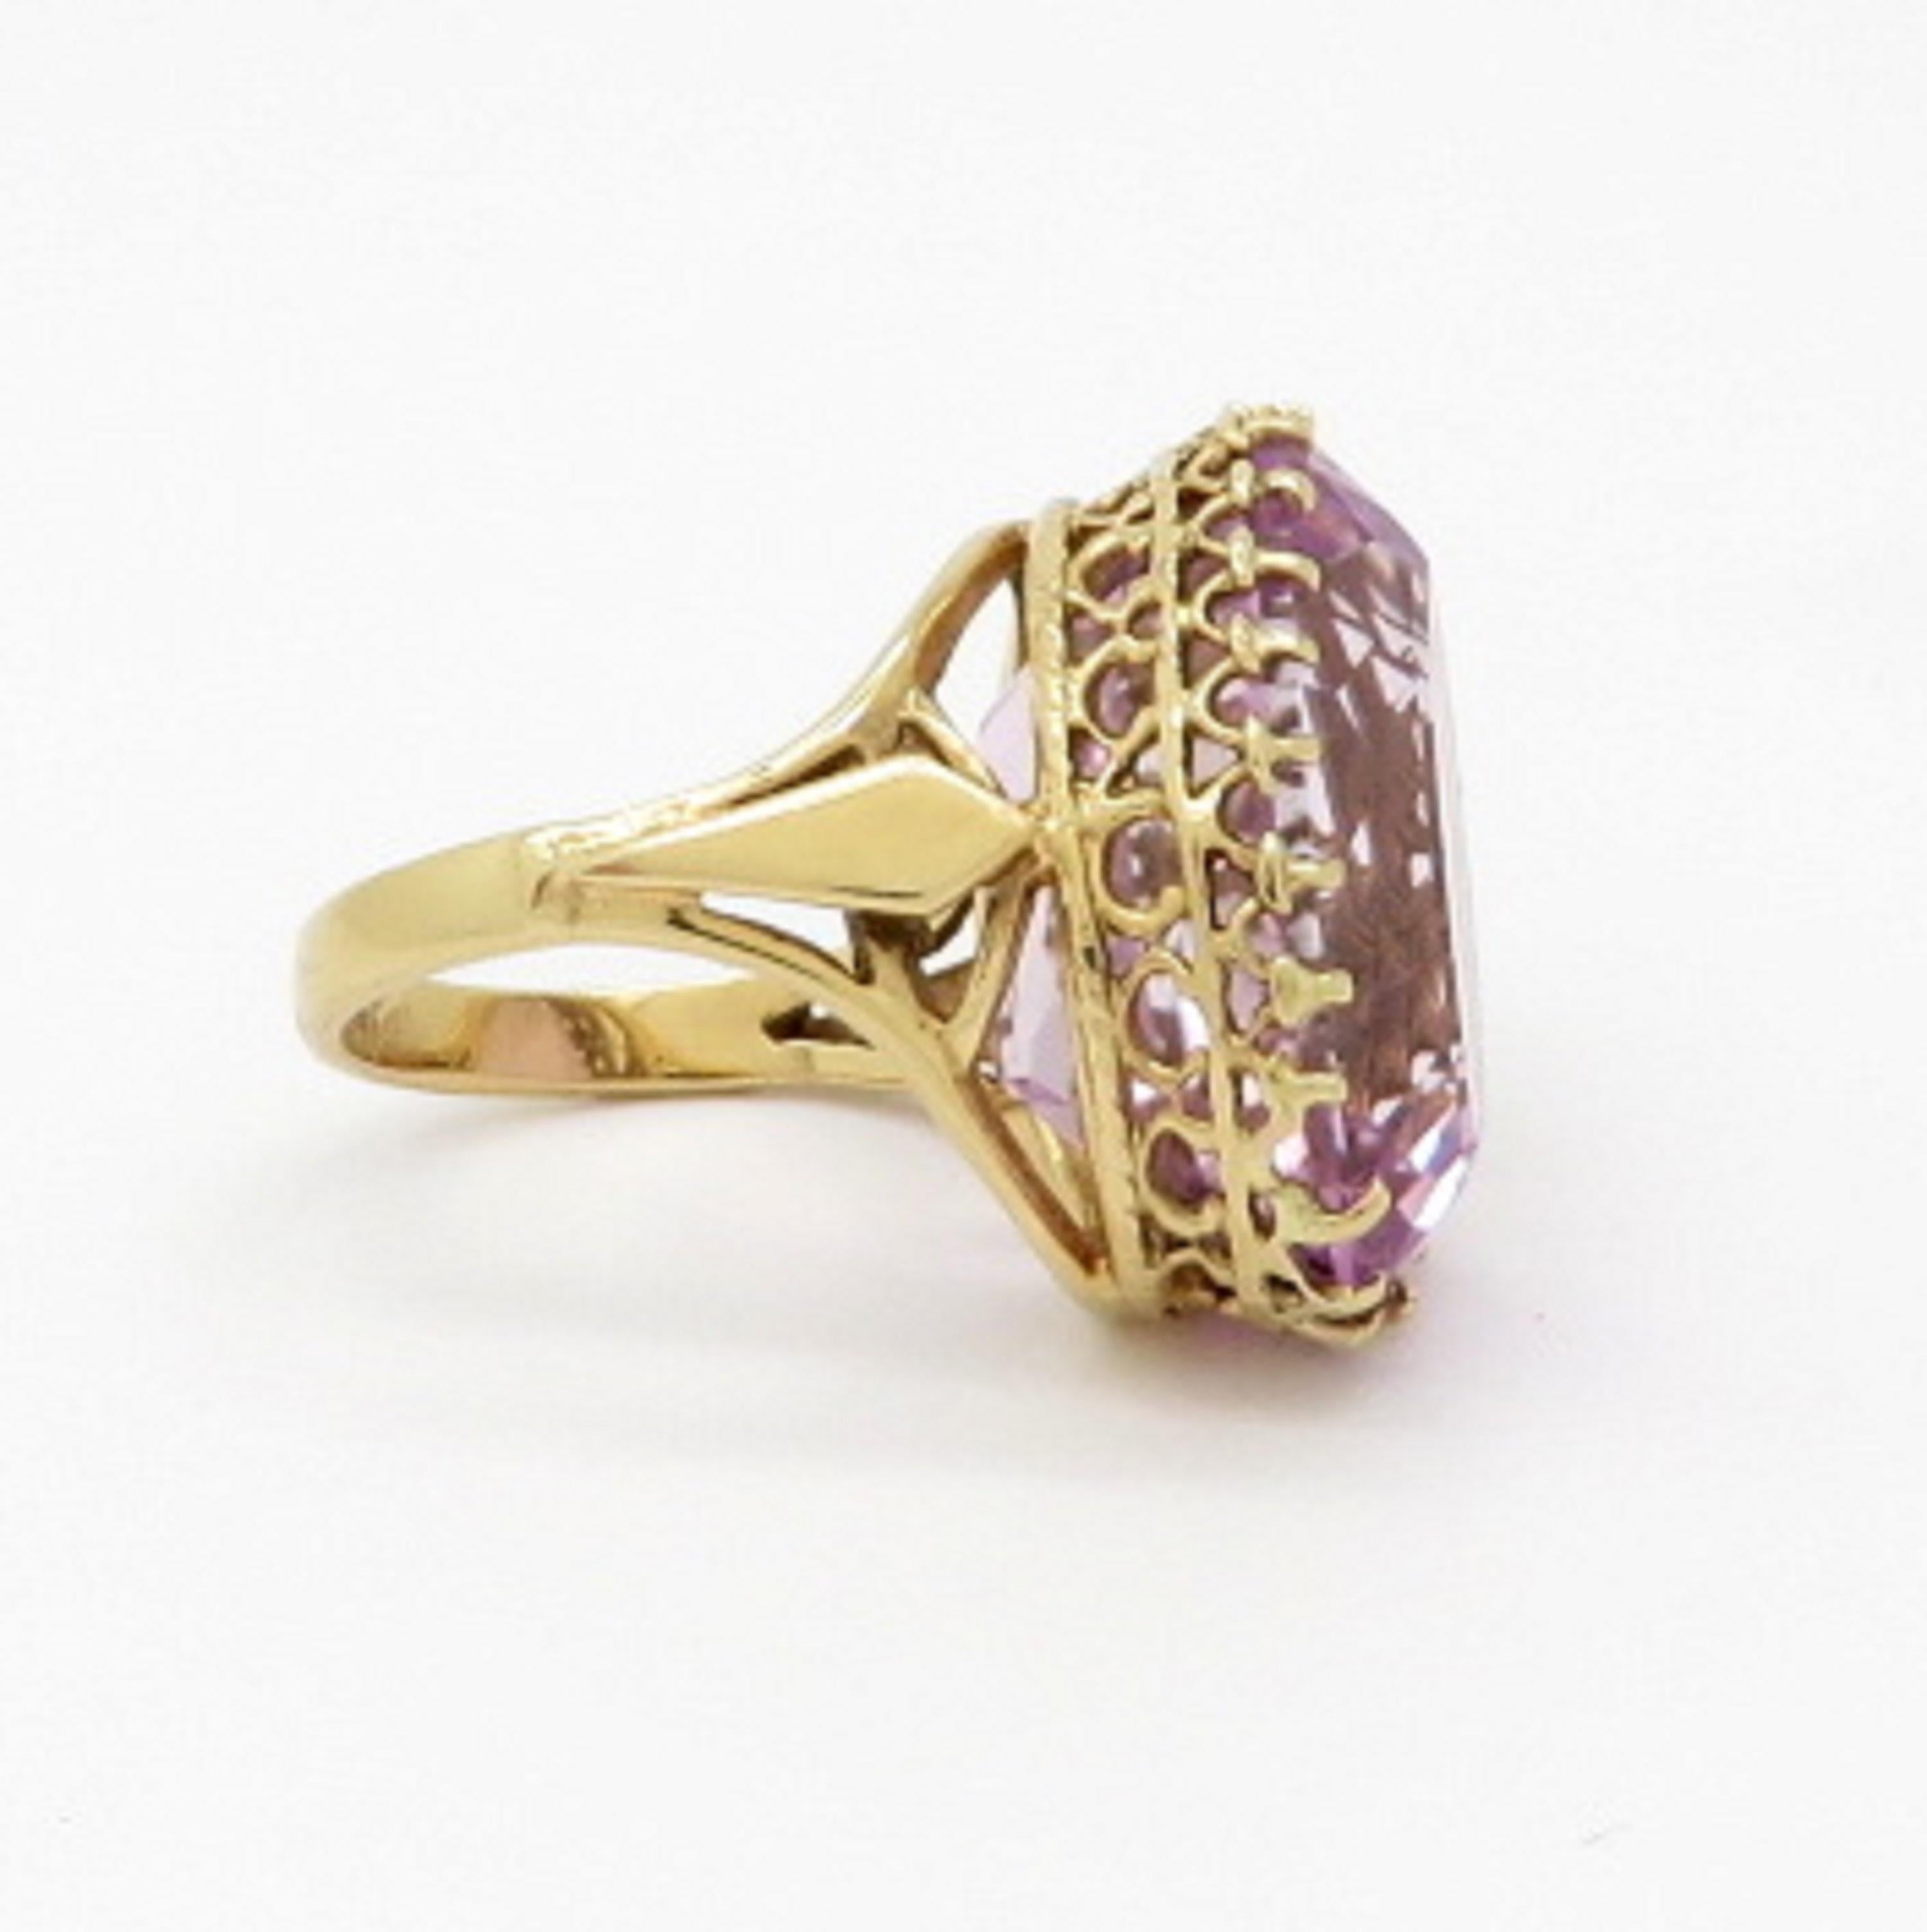 Antique Victorian style 14K yellow gold oval Kunzite fashion ring.  Showcasing one oval brilliant cut fine quality Kunzite gemstone weighing approximately 24.50 carats. The ring features openwork detailing and has a high polish finish. It is a